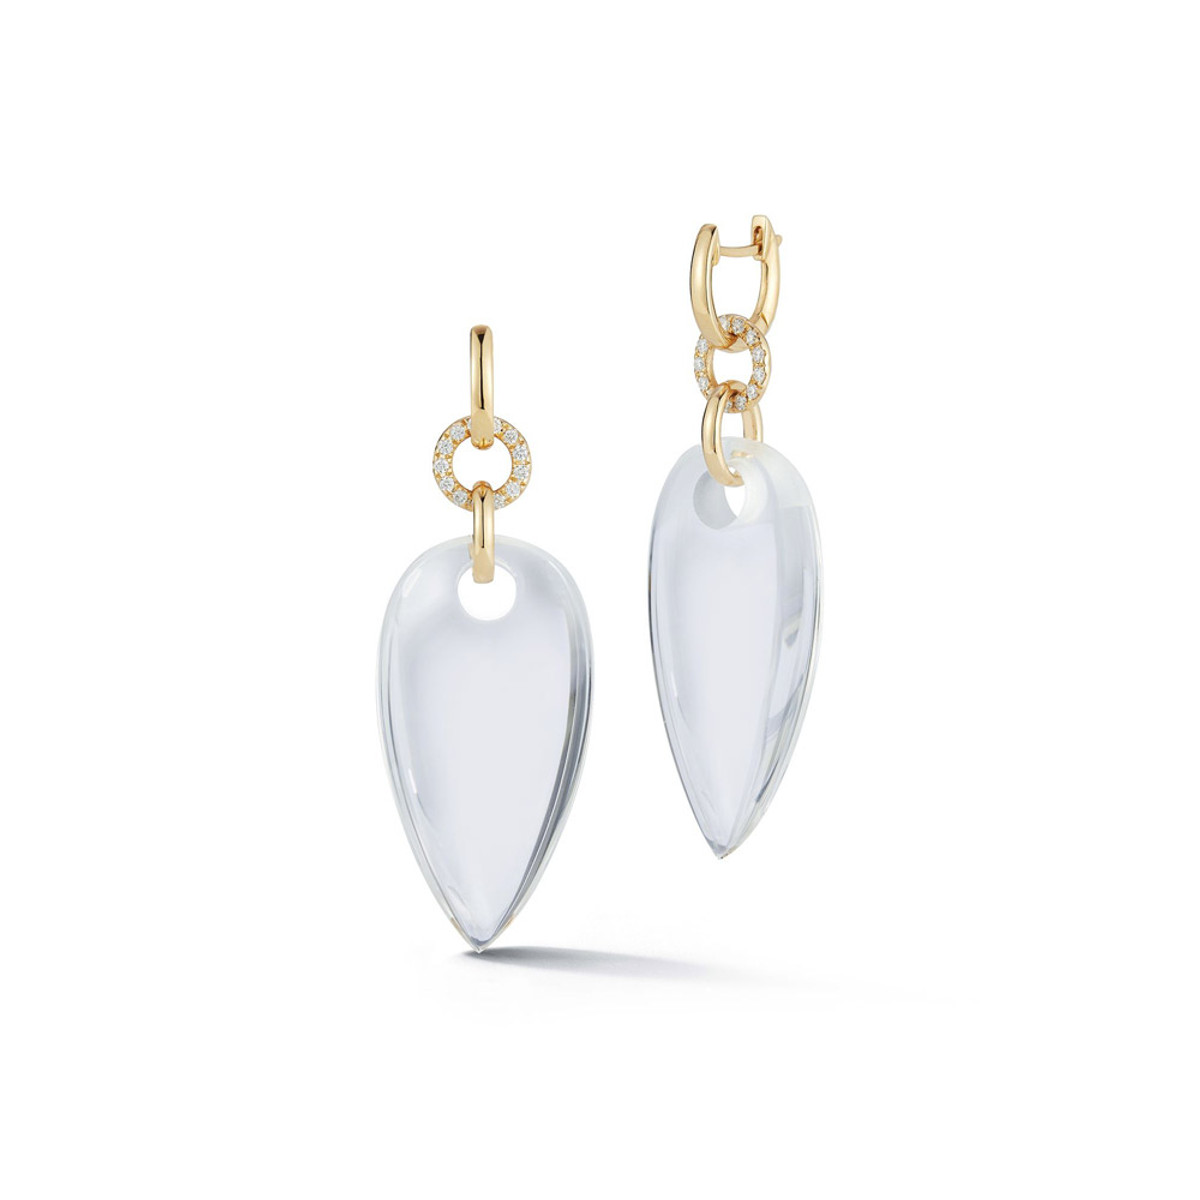 Walters Faith Bell 18K Yellow Gold Diamond and Rock Crystal Reverse Pear Shape Drop Earring-56188 Product Image